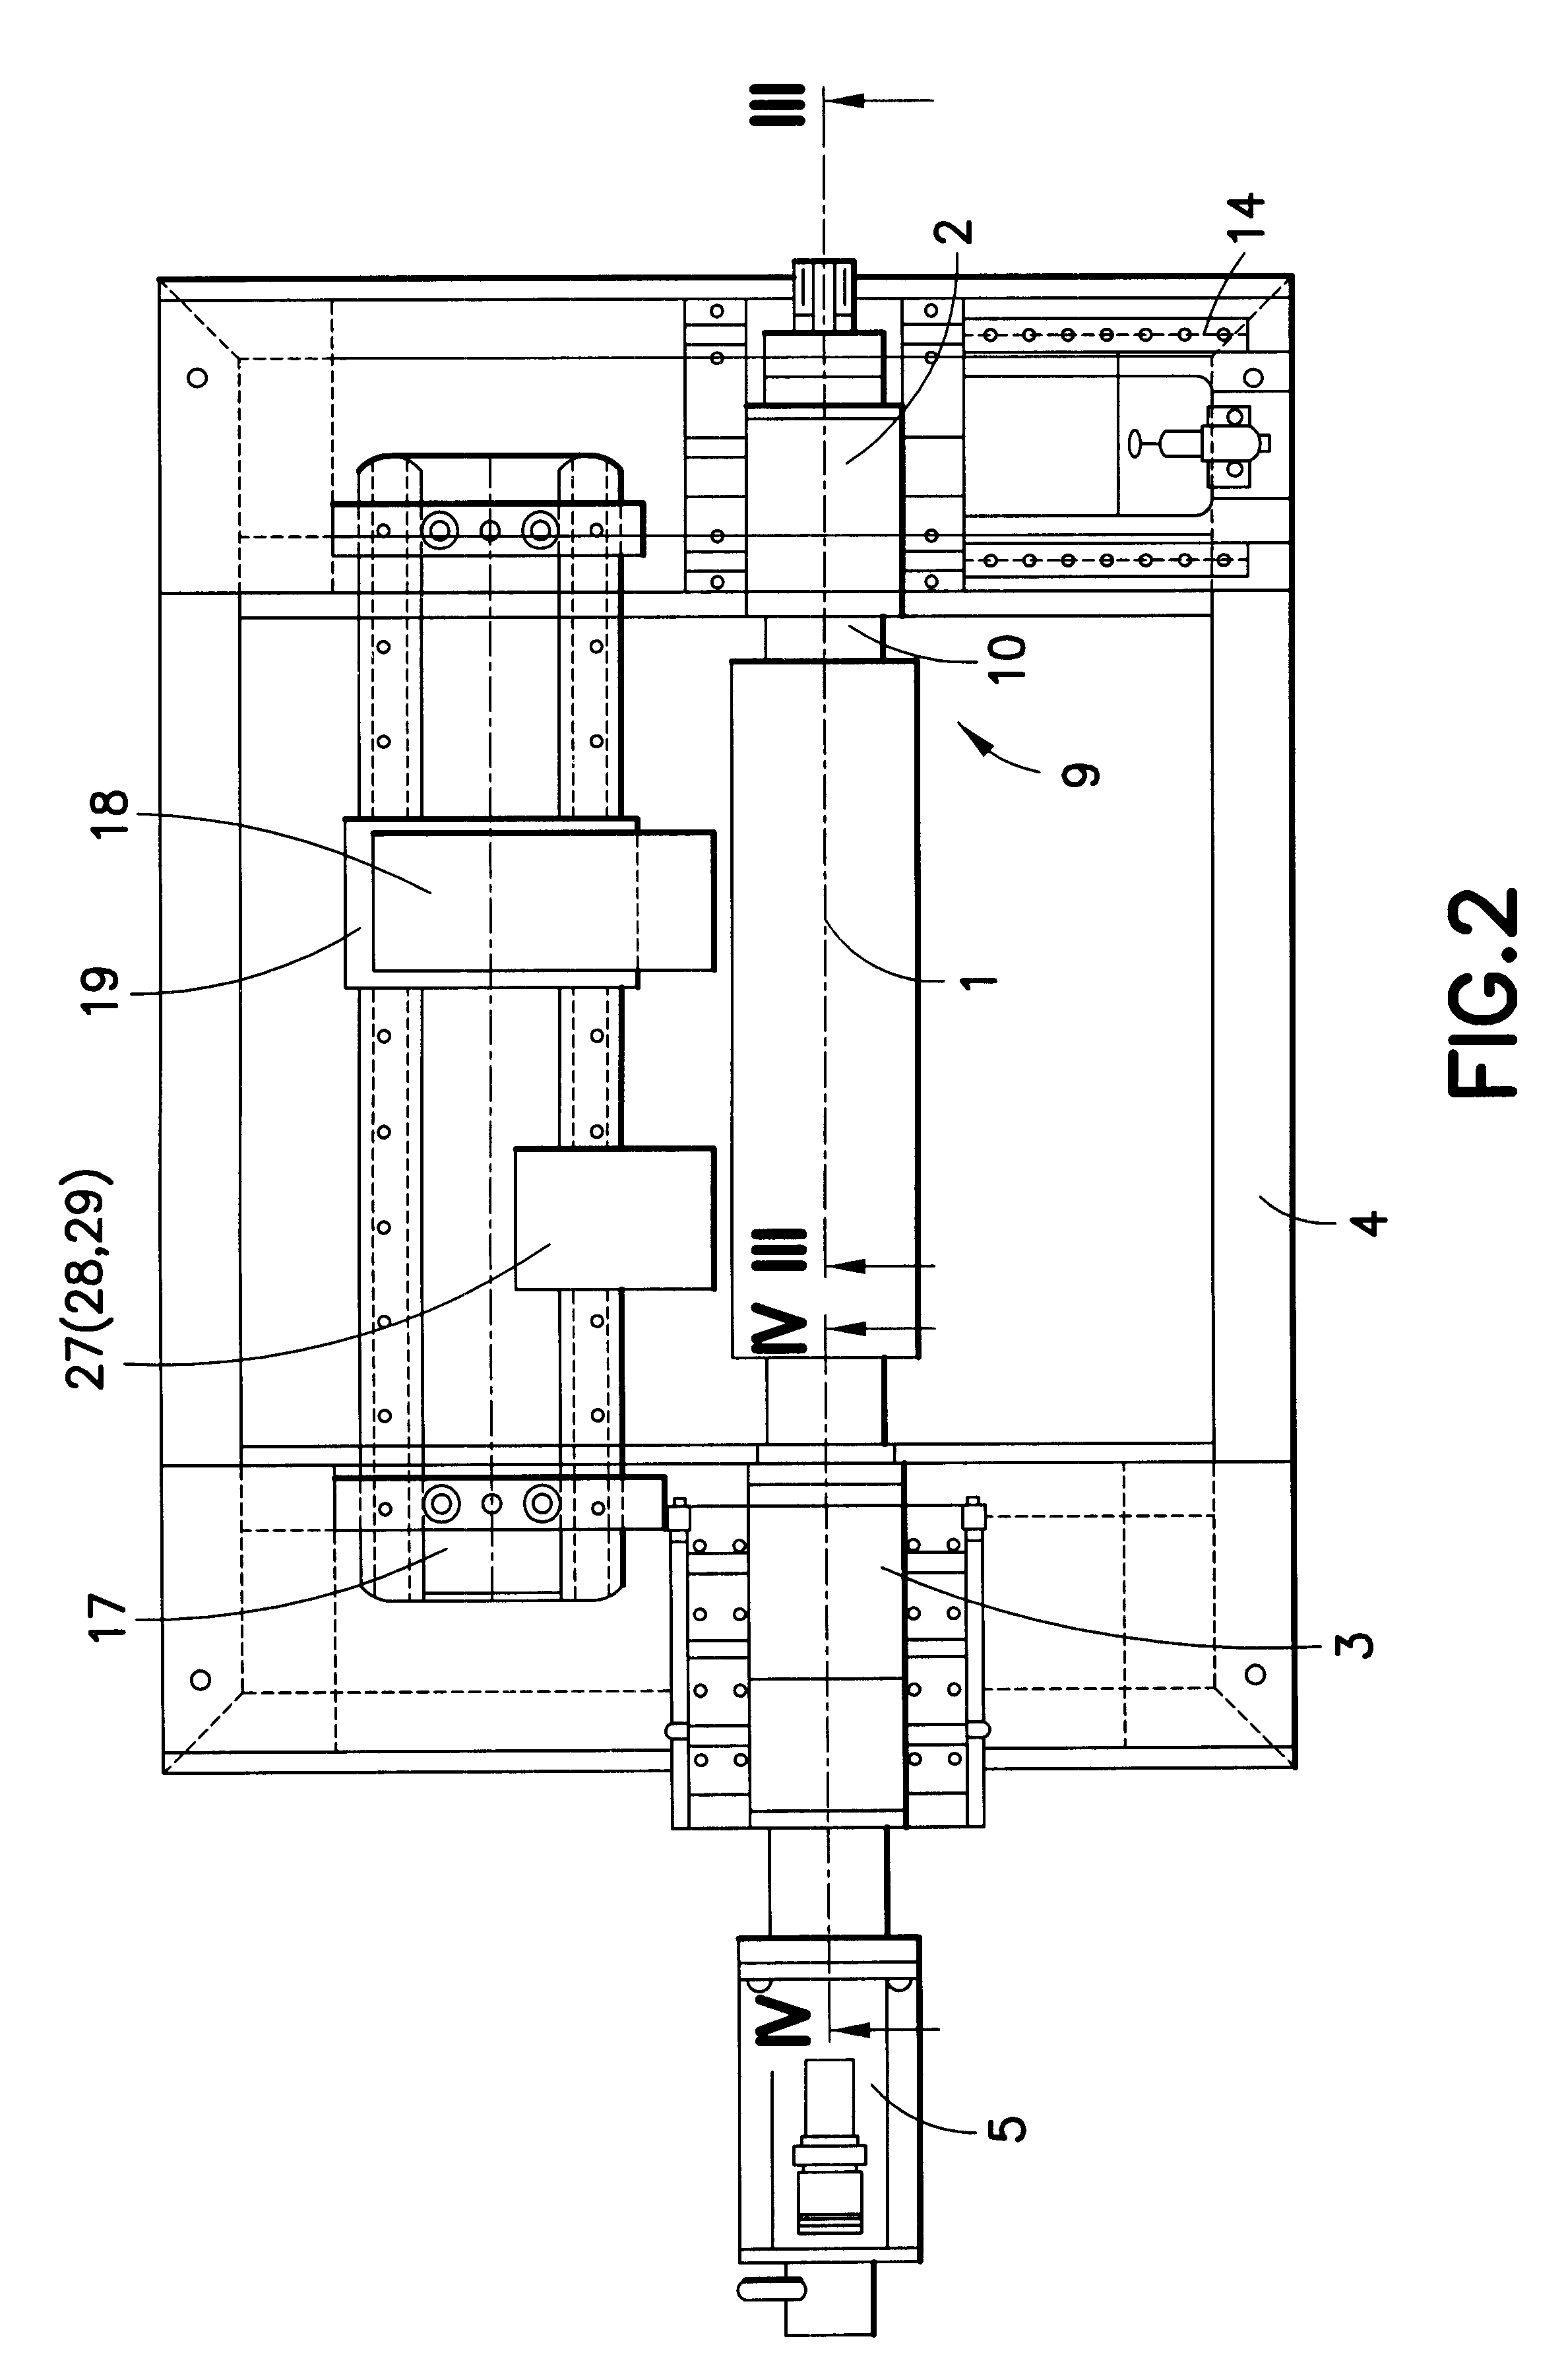 Apparatus for producing printing plates having movable journal for axial removal of plate